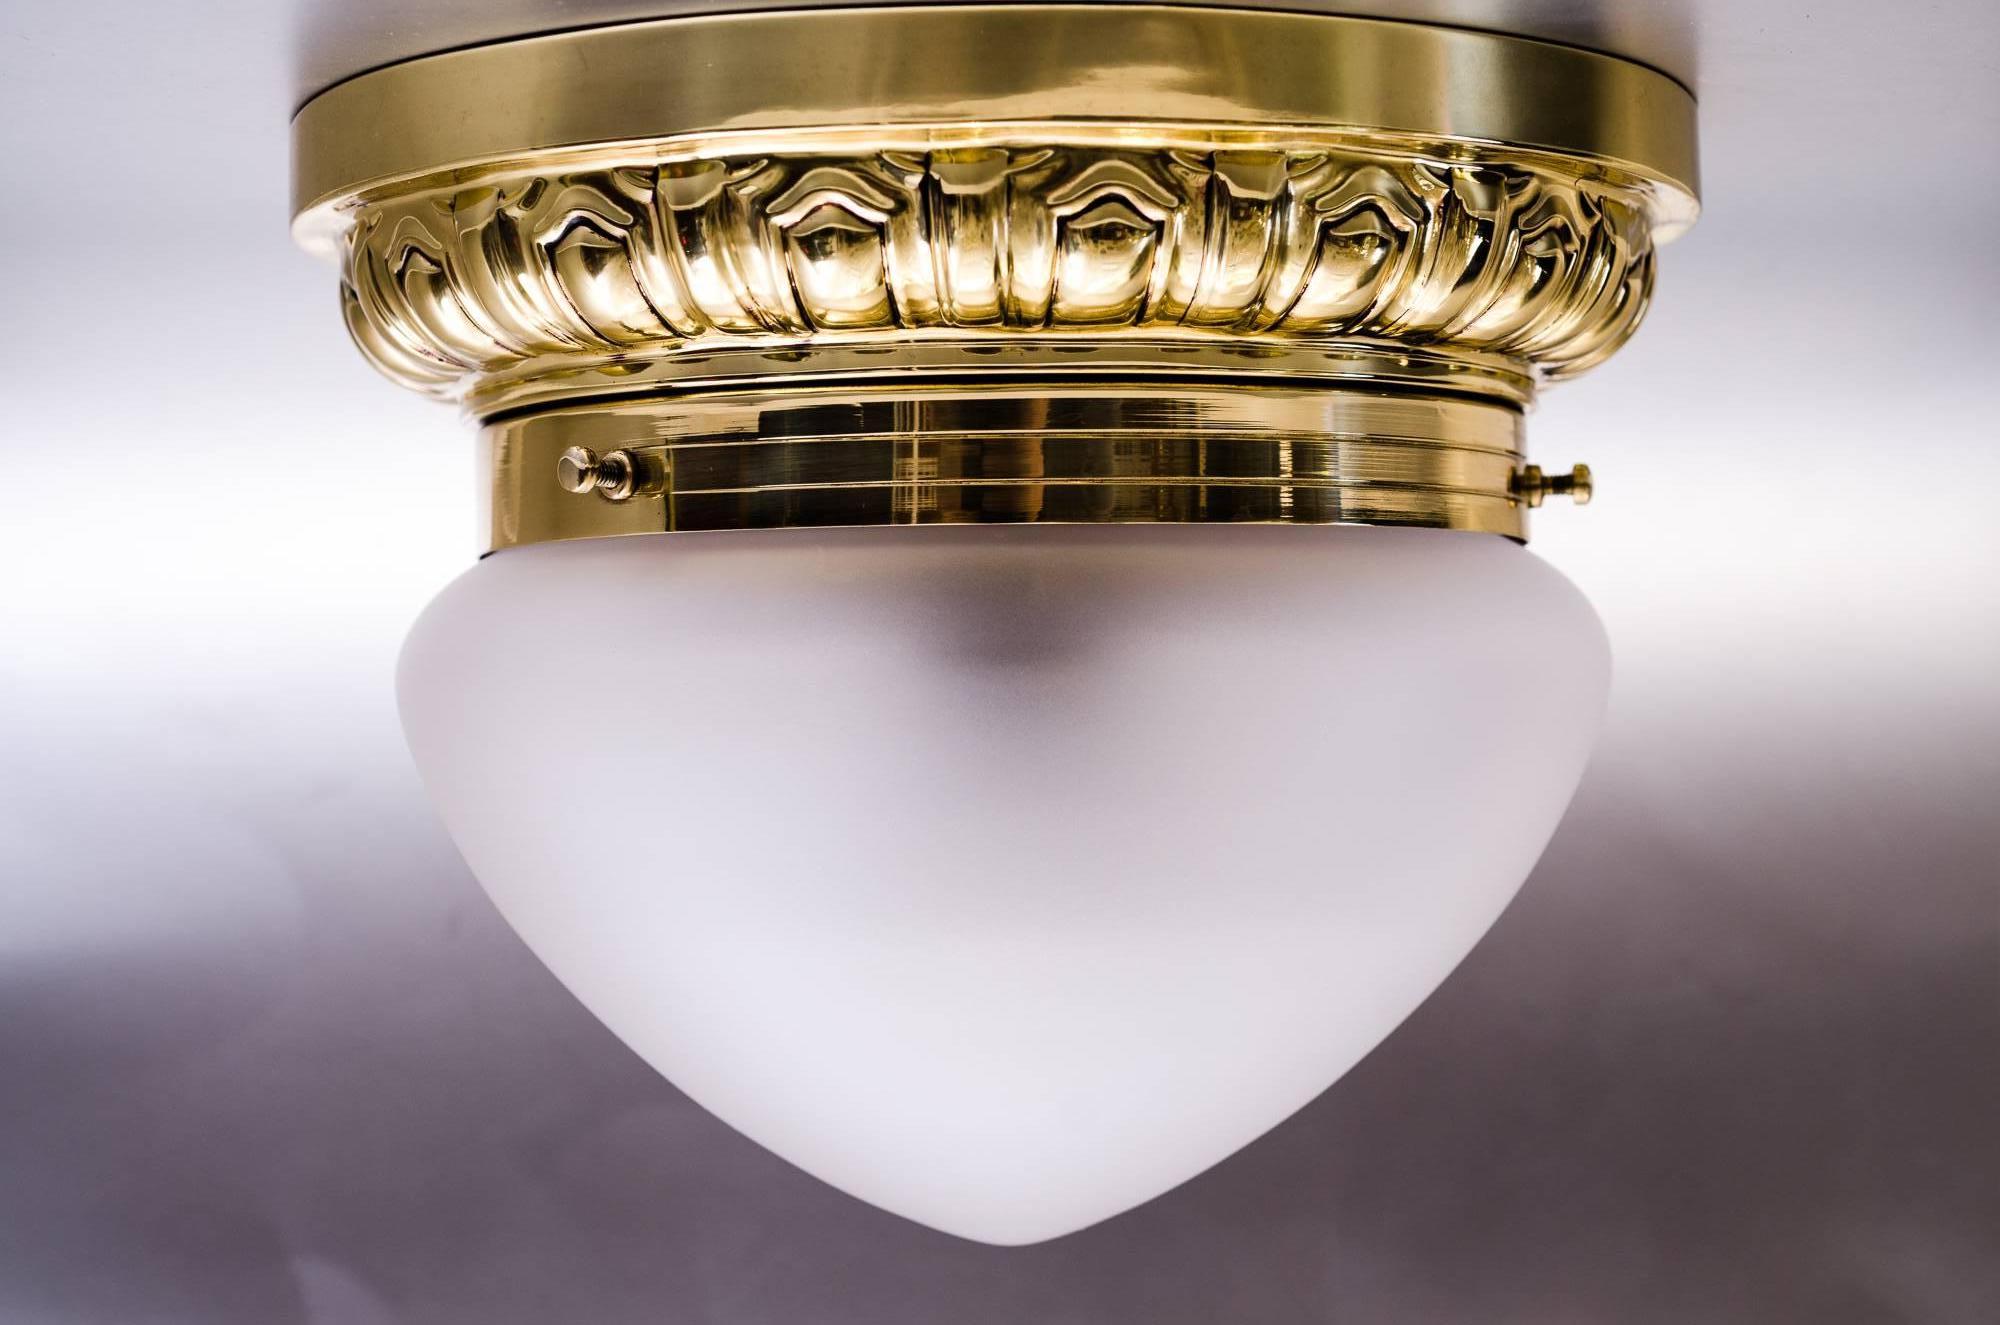 Art Deco ceiling lamp, circa 1920s
polished and stove enameled.